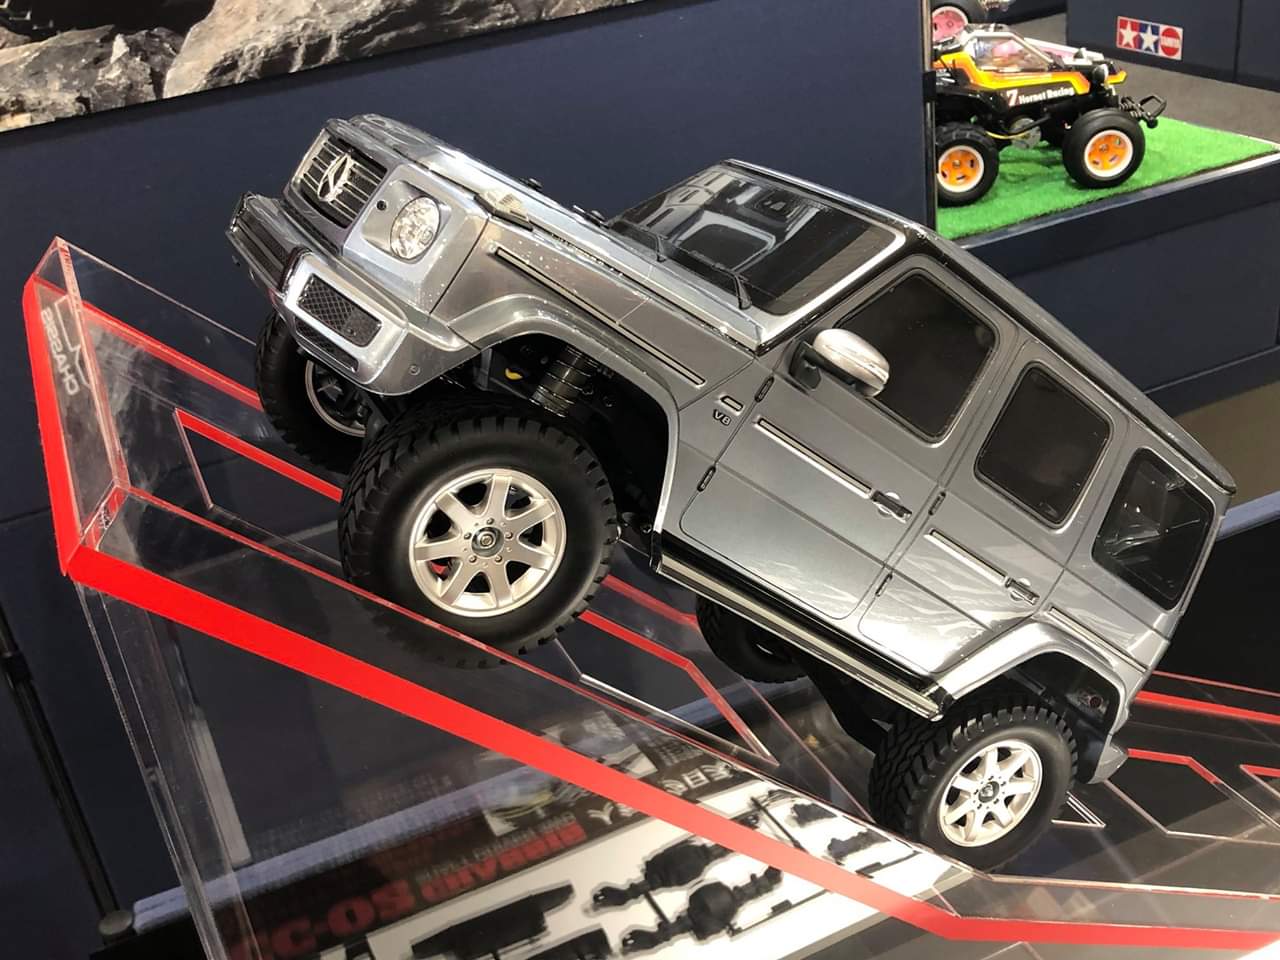 First photos of Tamiya 42345 TRF420 and 58675 Mercedes-Benz G 500 CC-02 ...